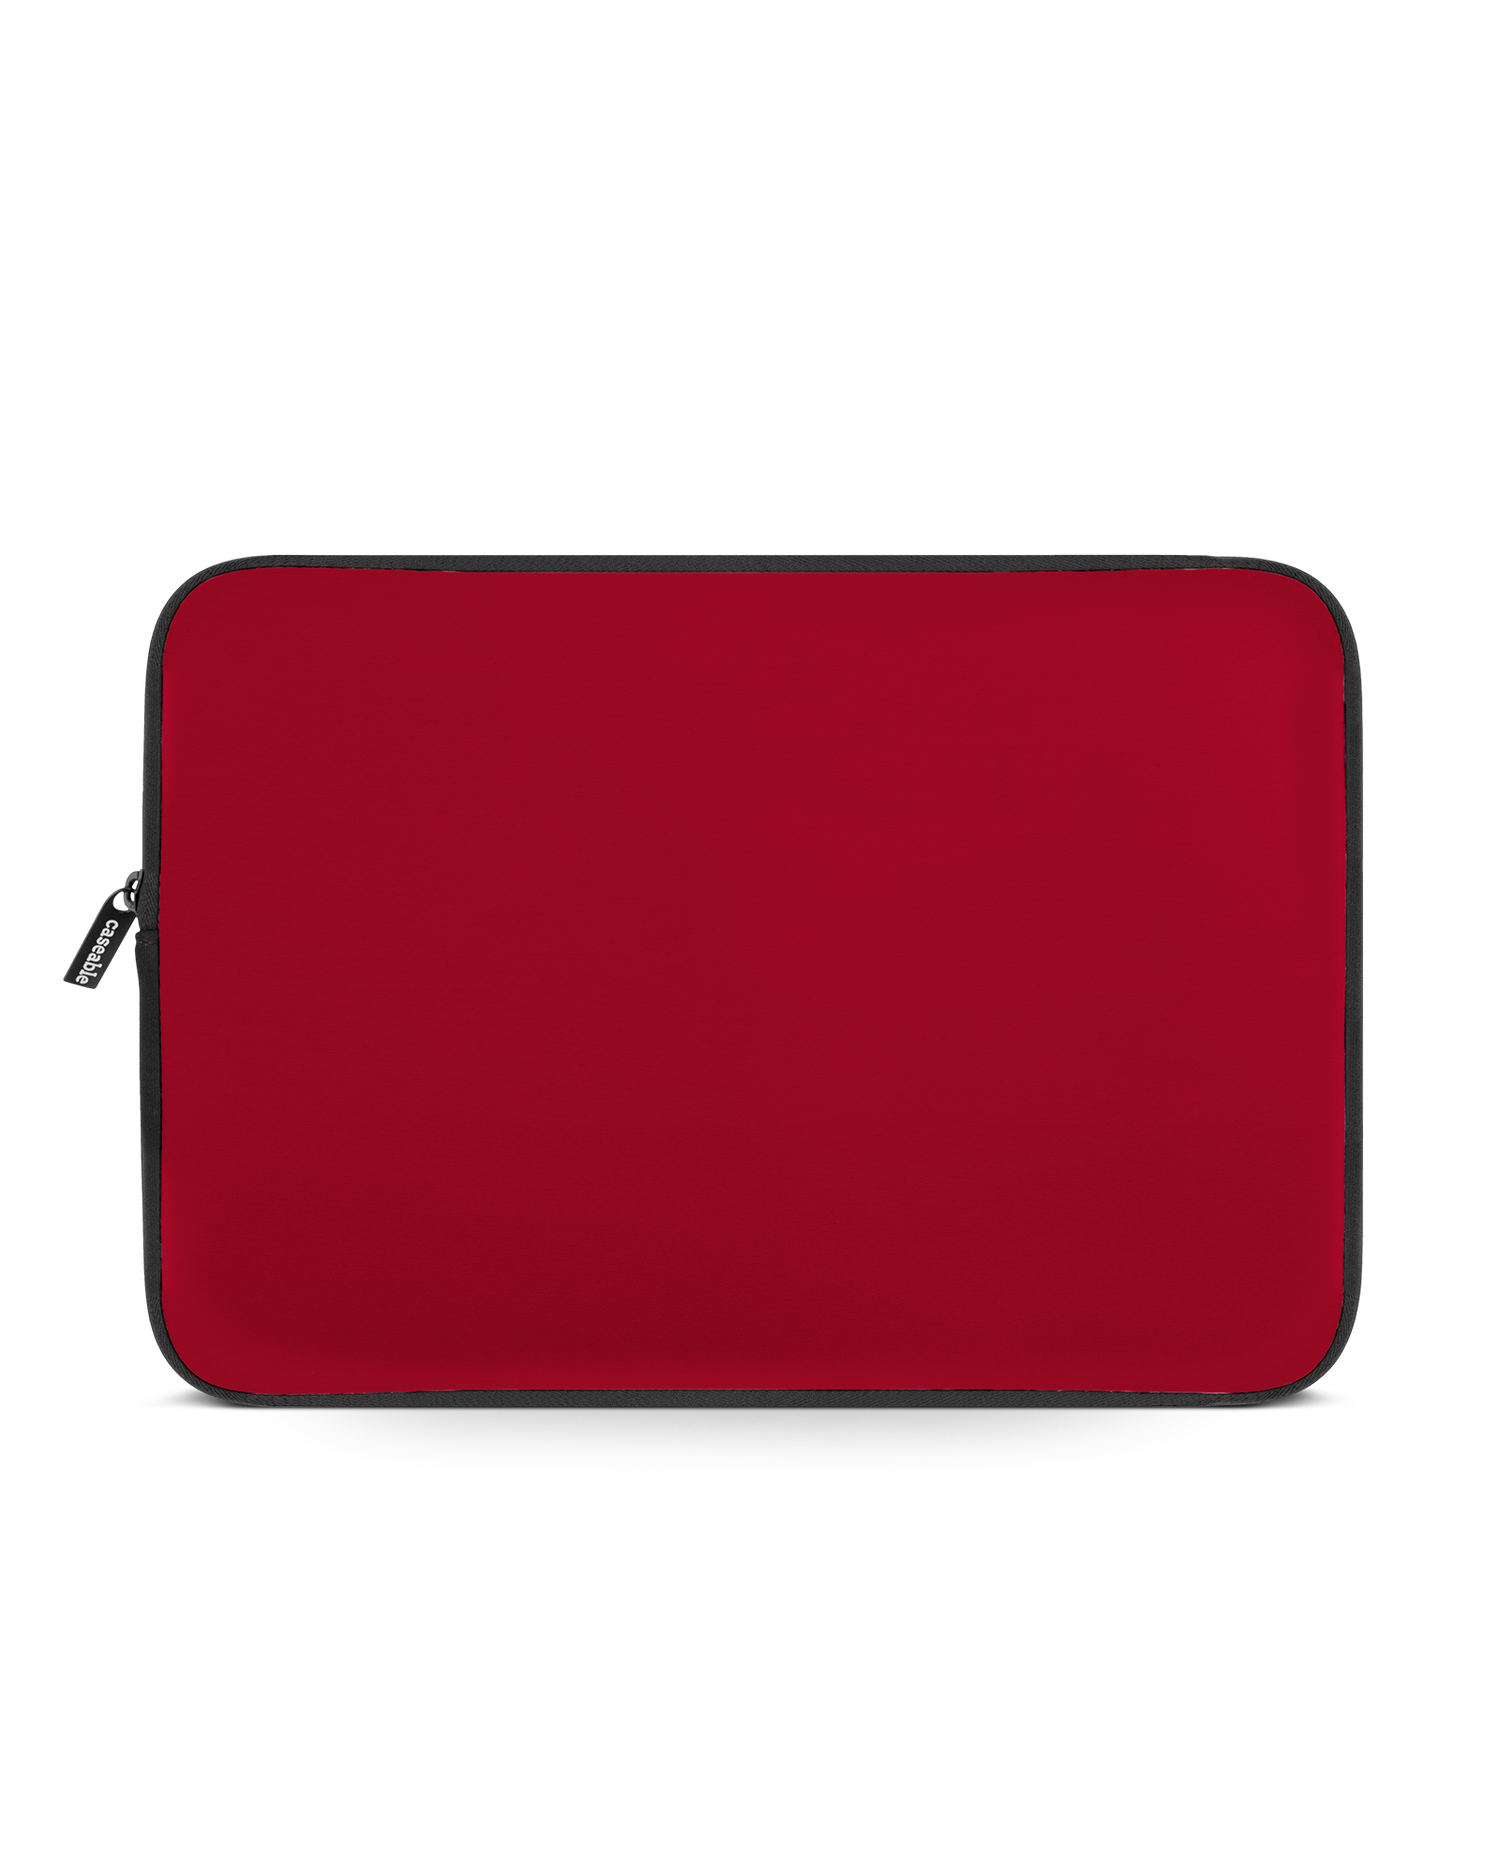 RED Laptop Case 14 inch: Front View